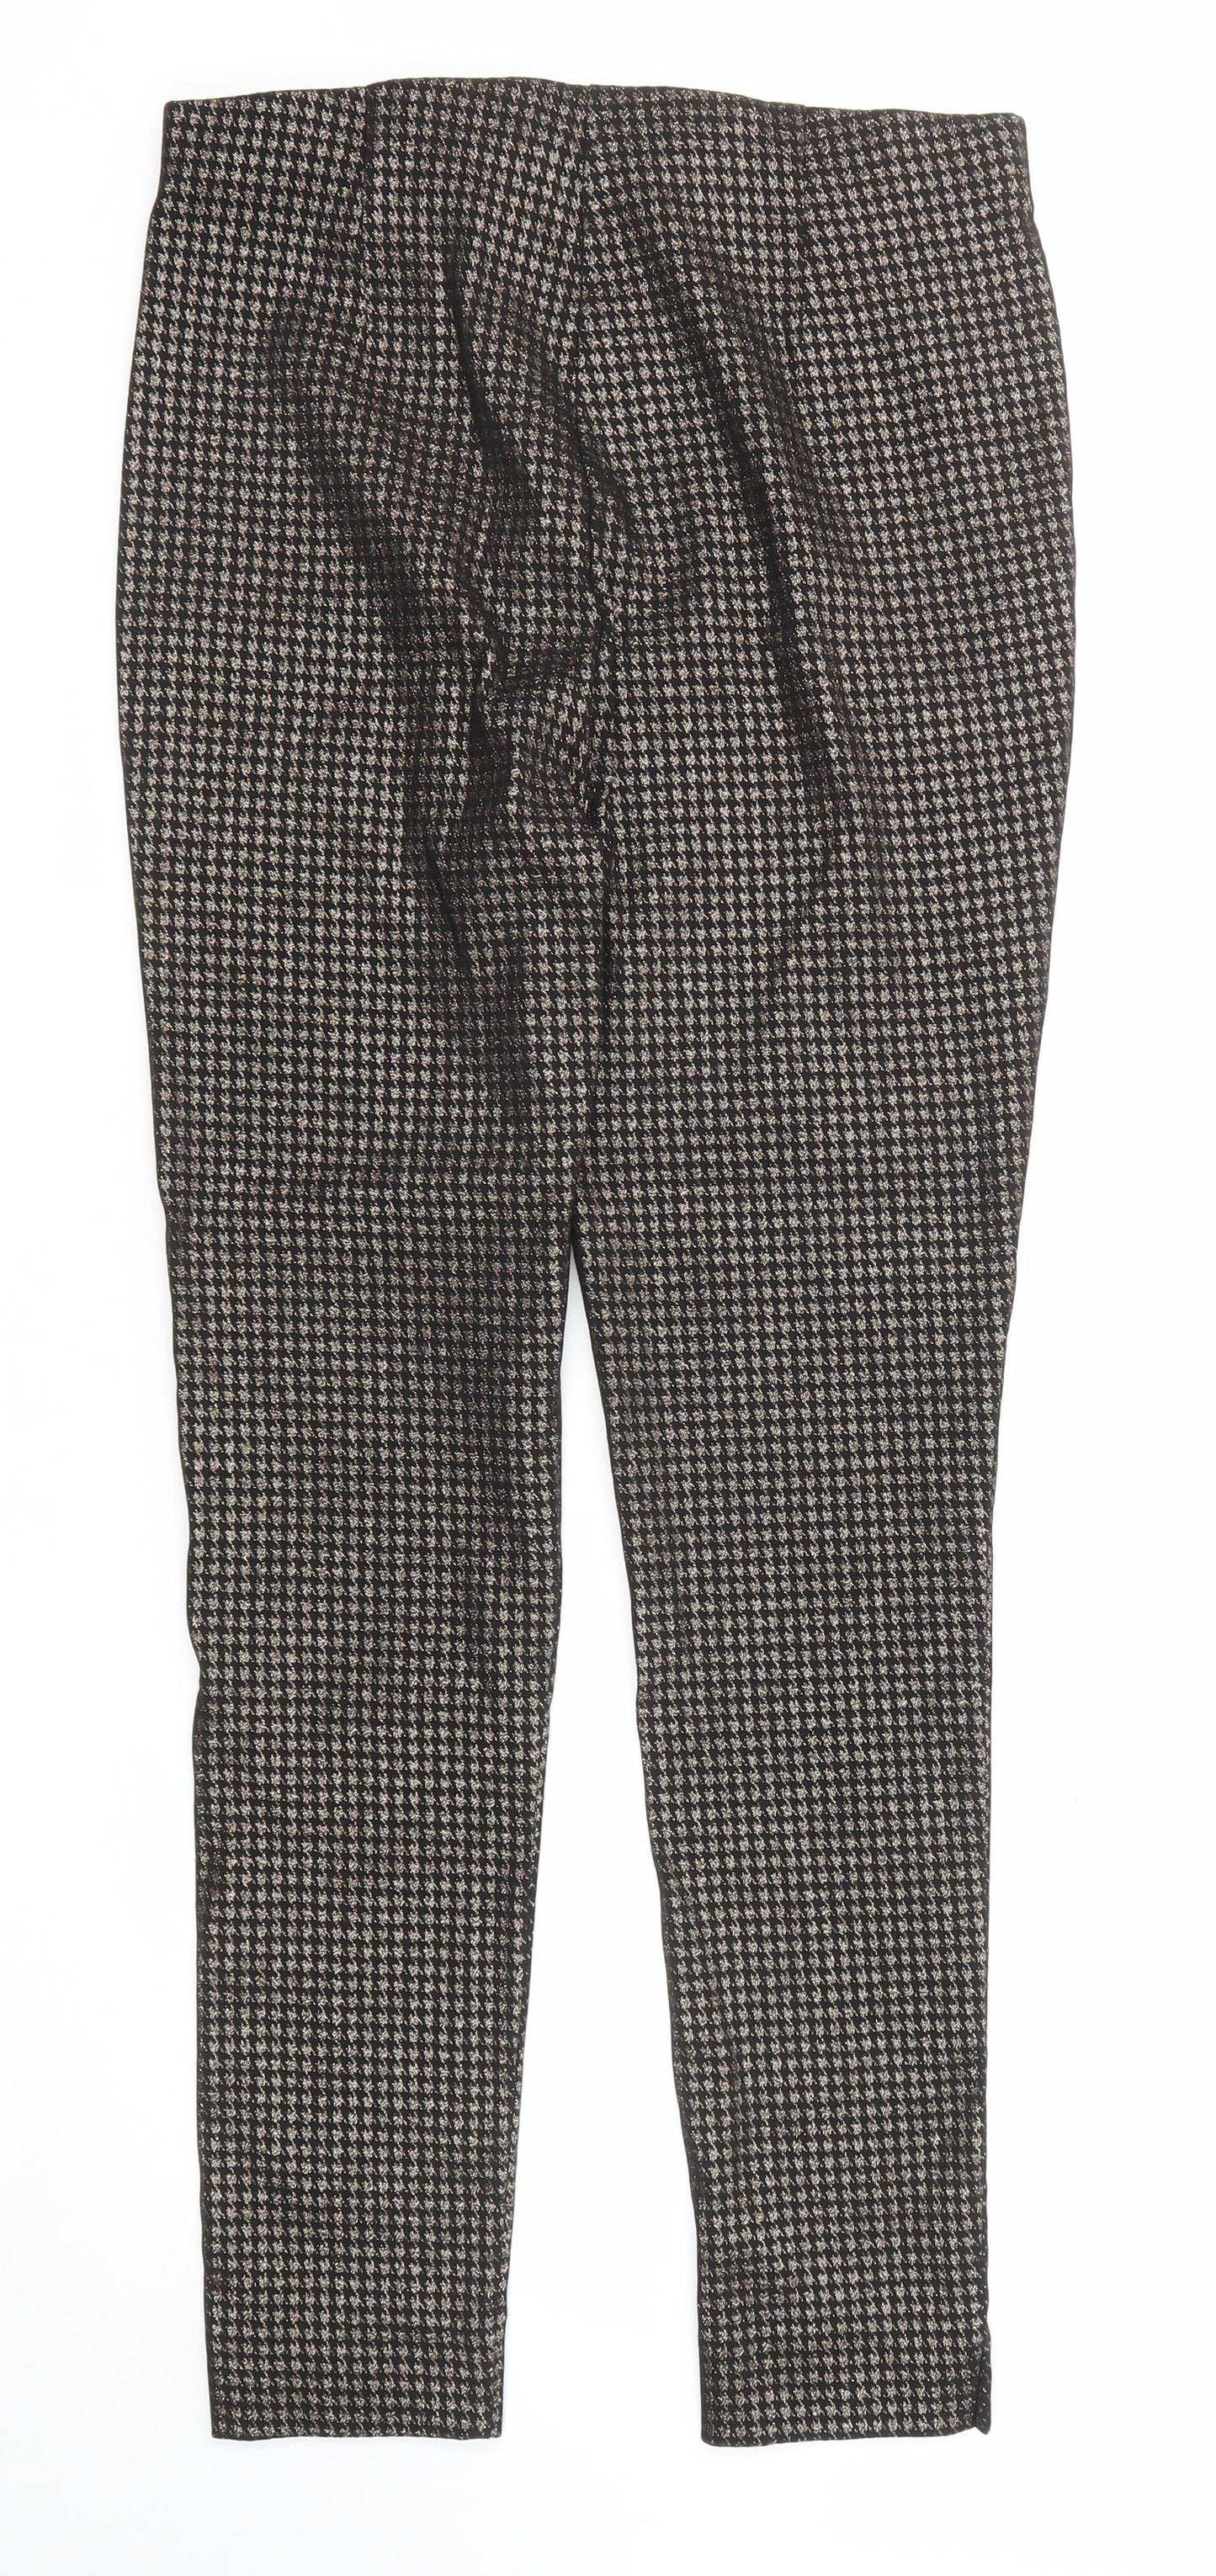 M&Co Womens Black Geometric Cotton Carrot Trousers Size 16 Regular - Houndstooth pattern